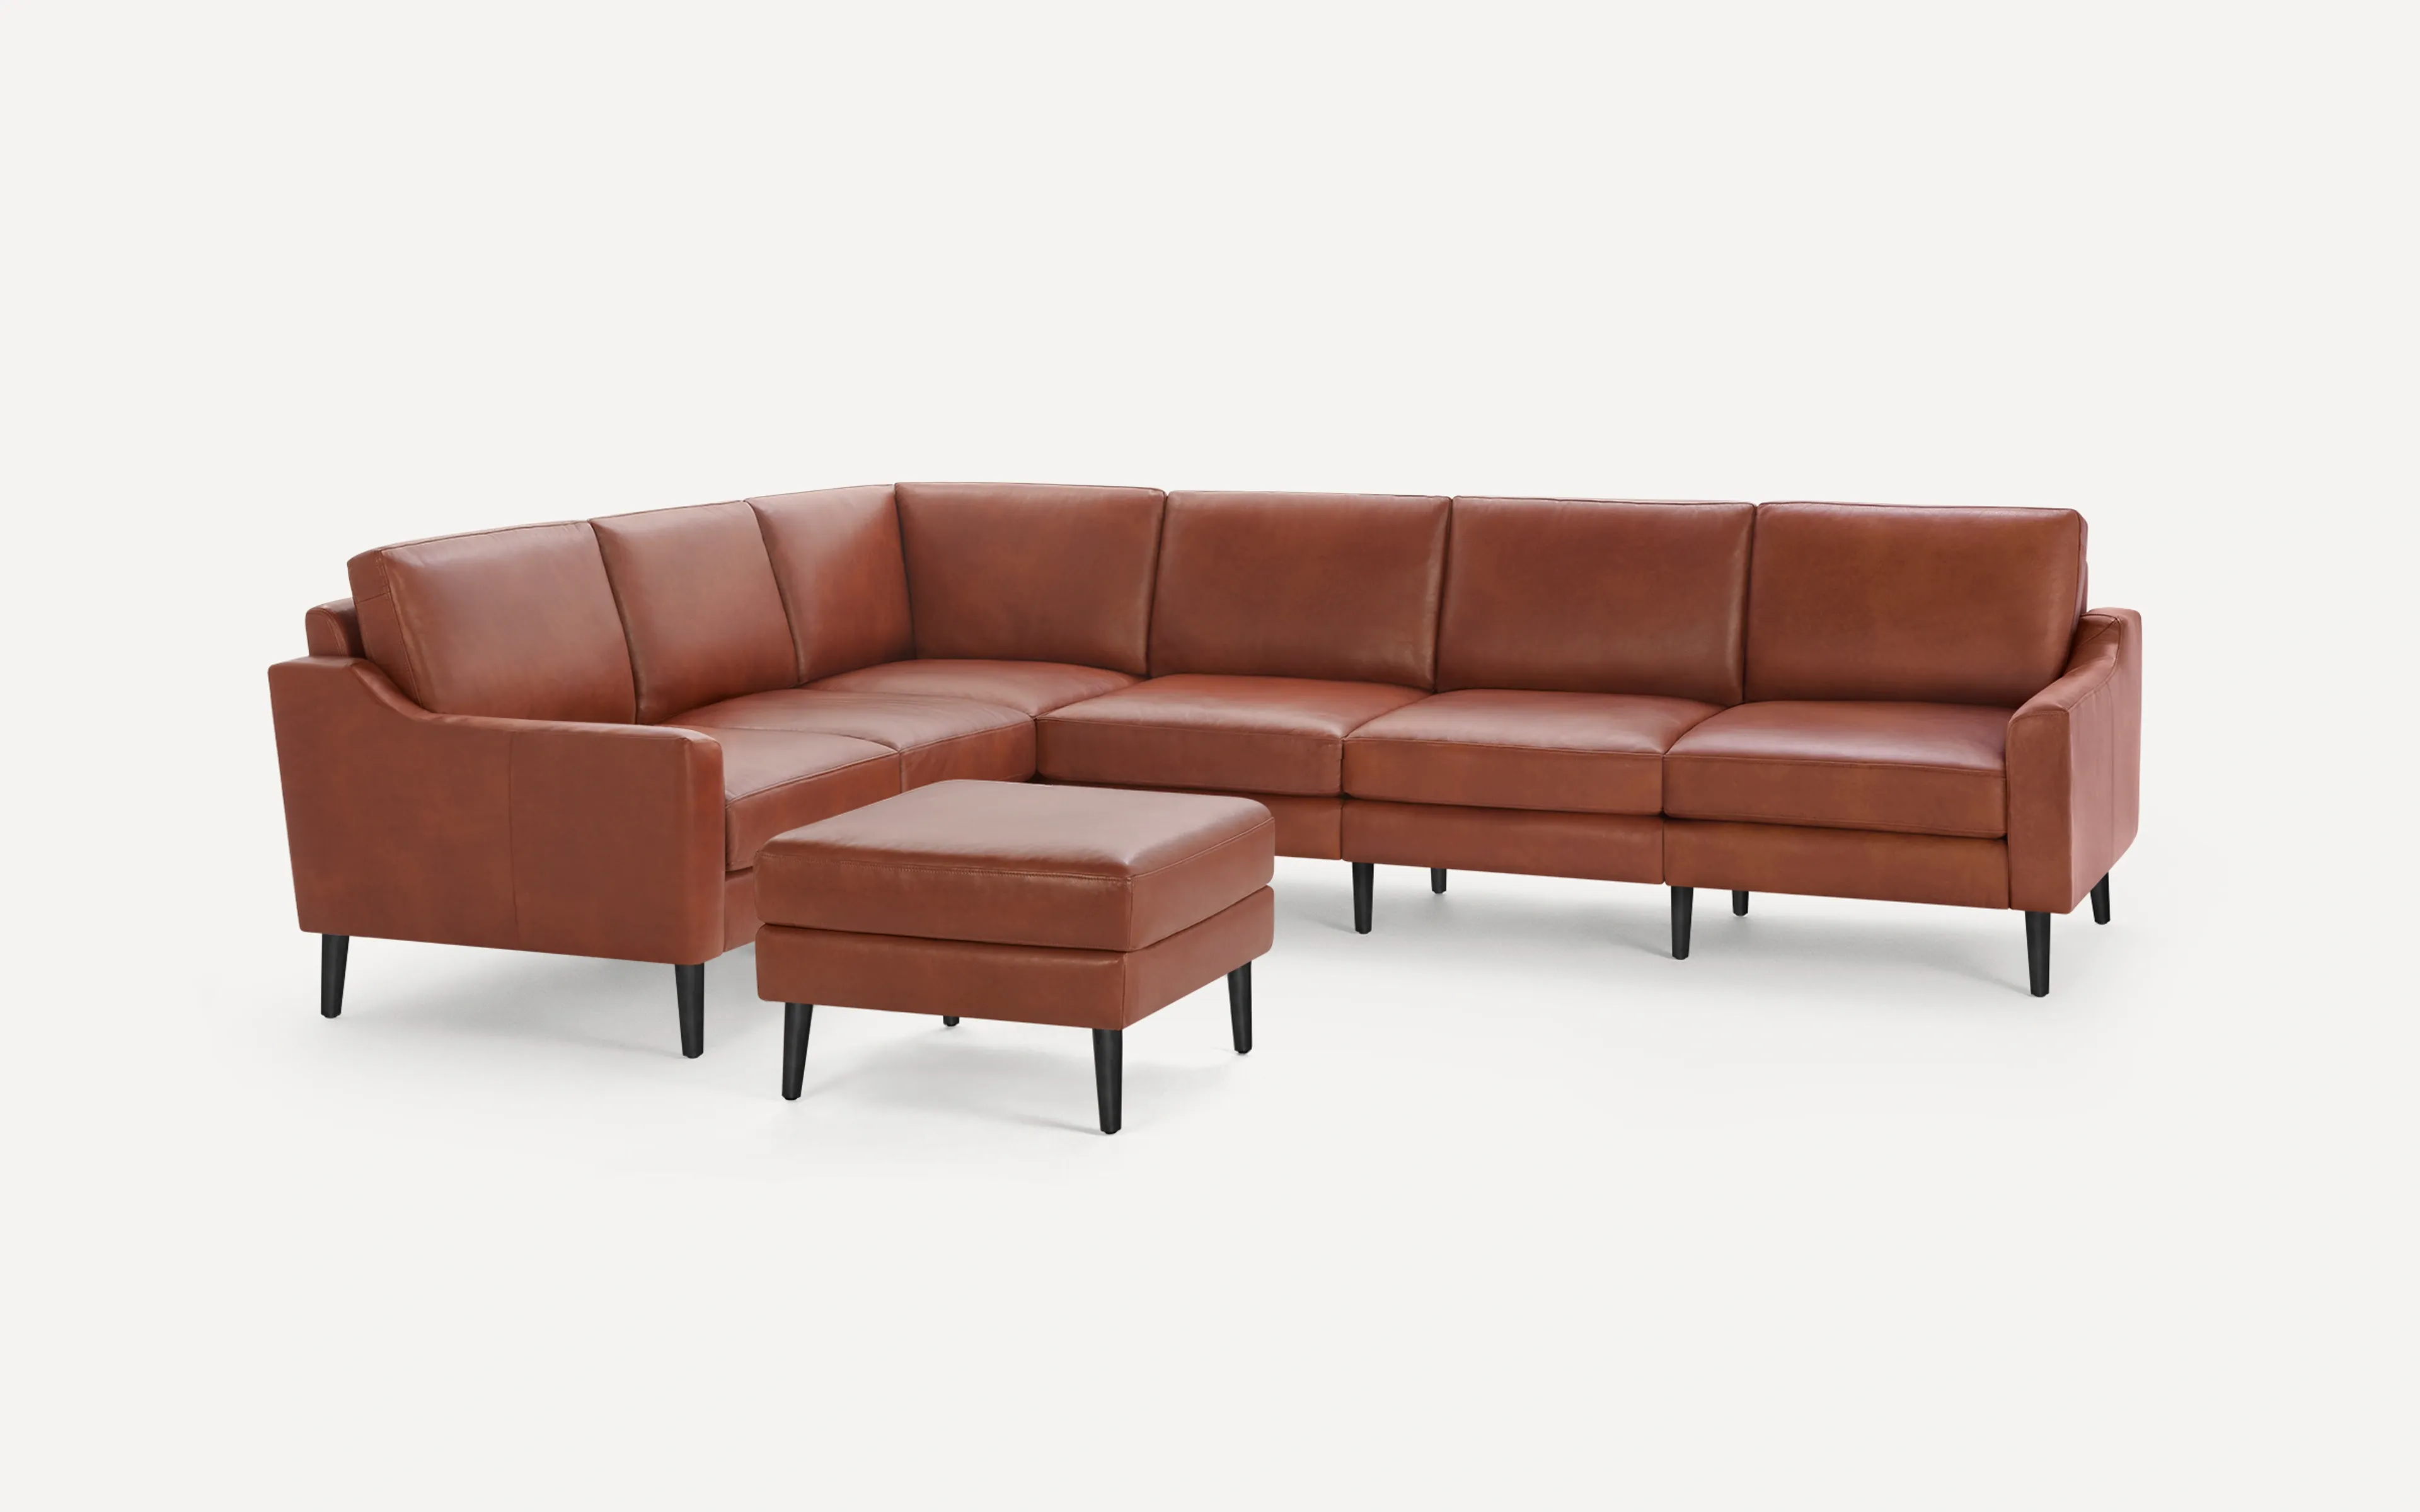 Slope Nomad Leather 6-Seat Corner Sectional with Ottoman